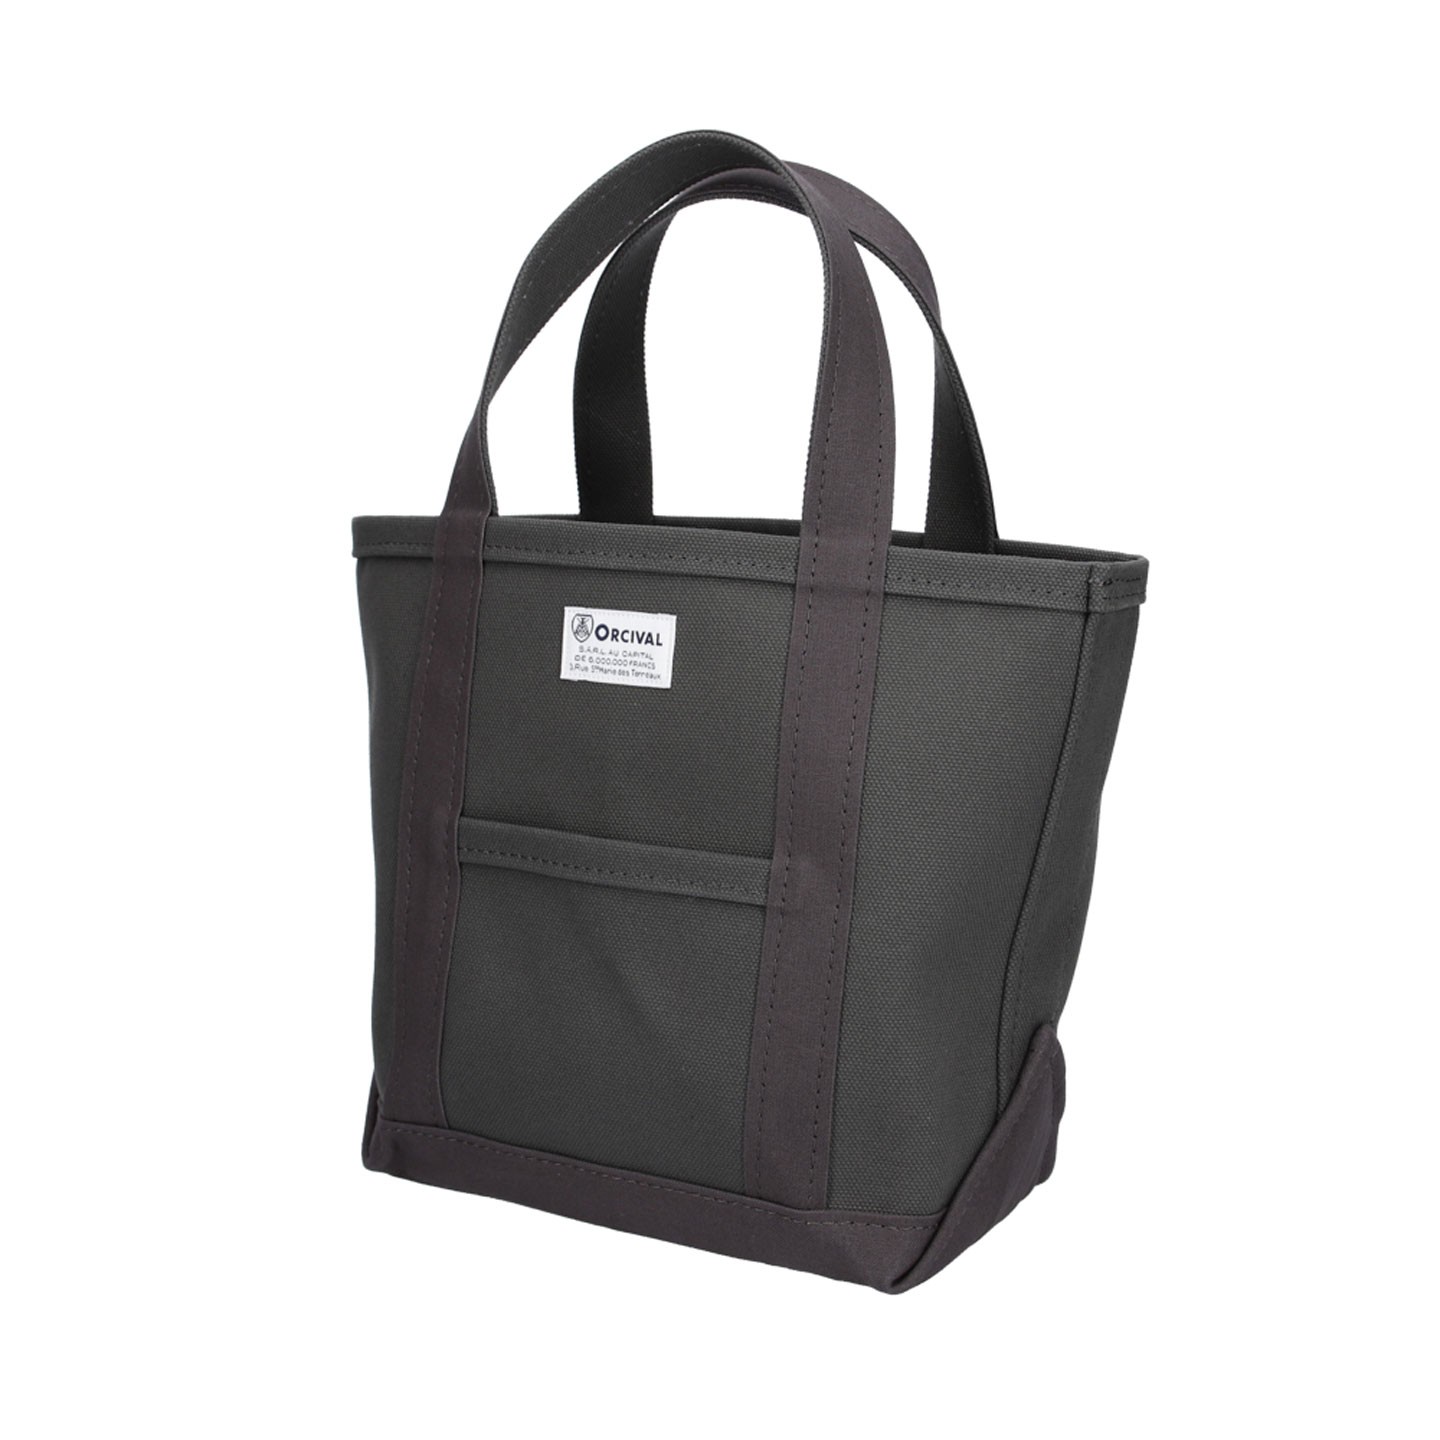 The charcoal tote-bag by Orcival in small size